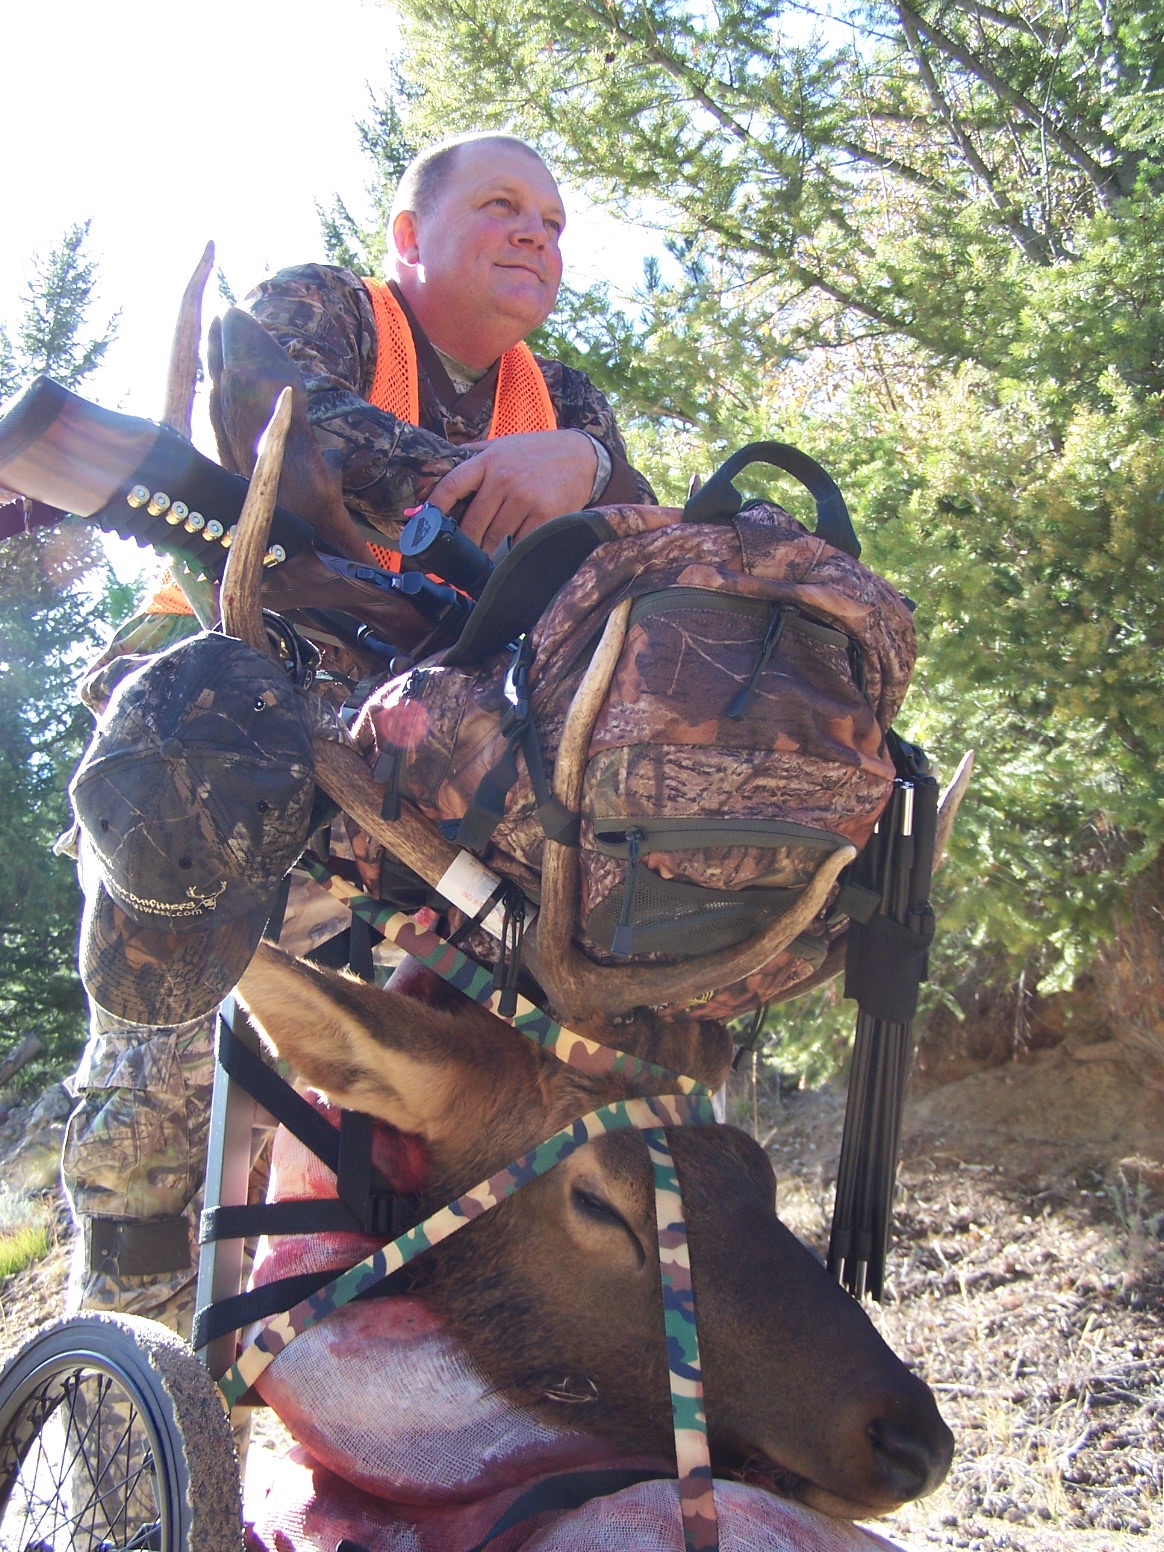 use a wheel cart instead of your hunting backpack